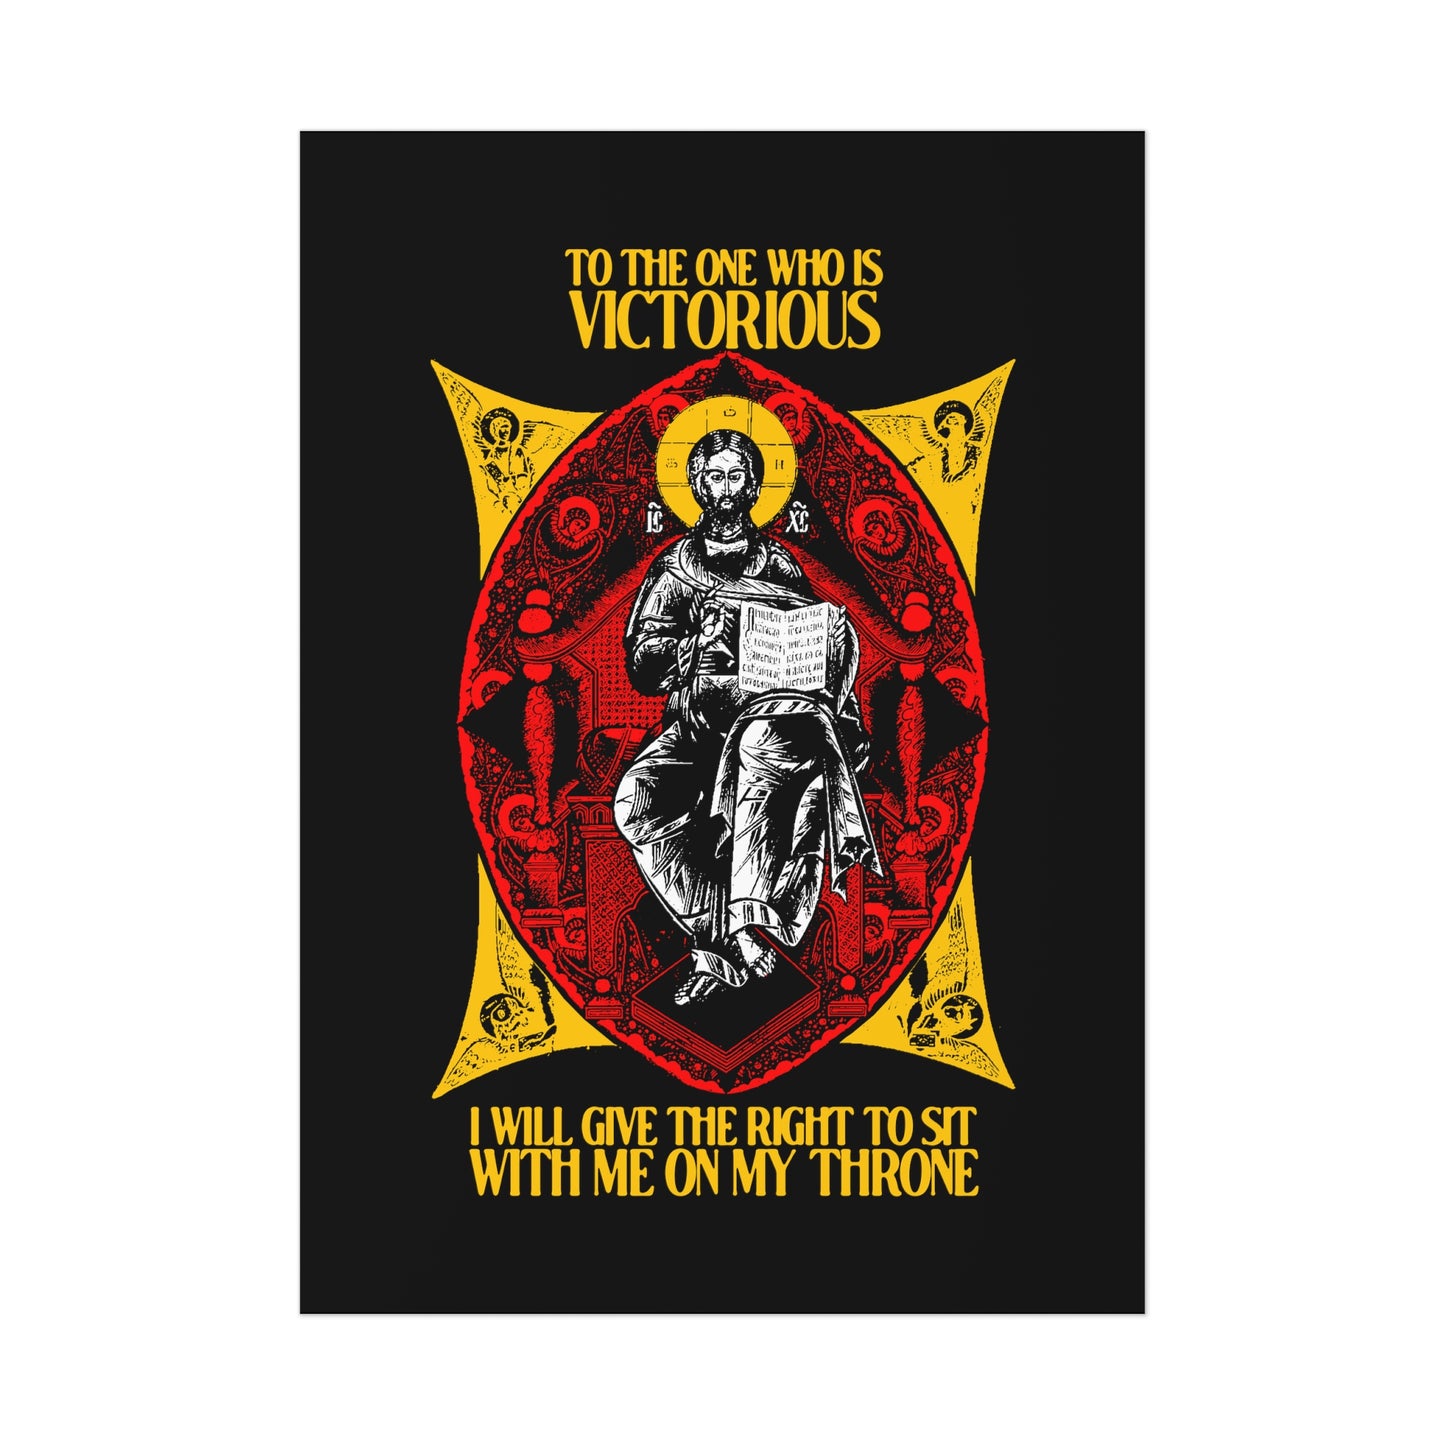 Christ Enthroned IconoGraphic (To the One Who Is Victorious) No. 1 | Orthodox Christian Art Poster